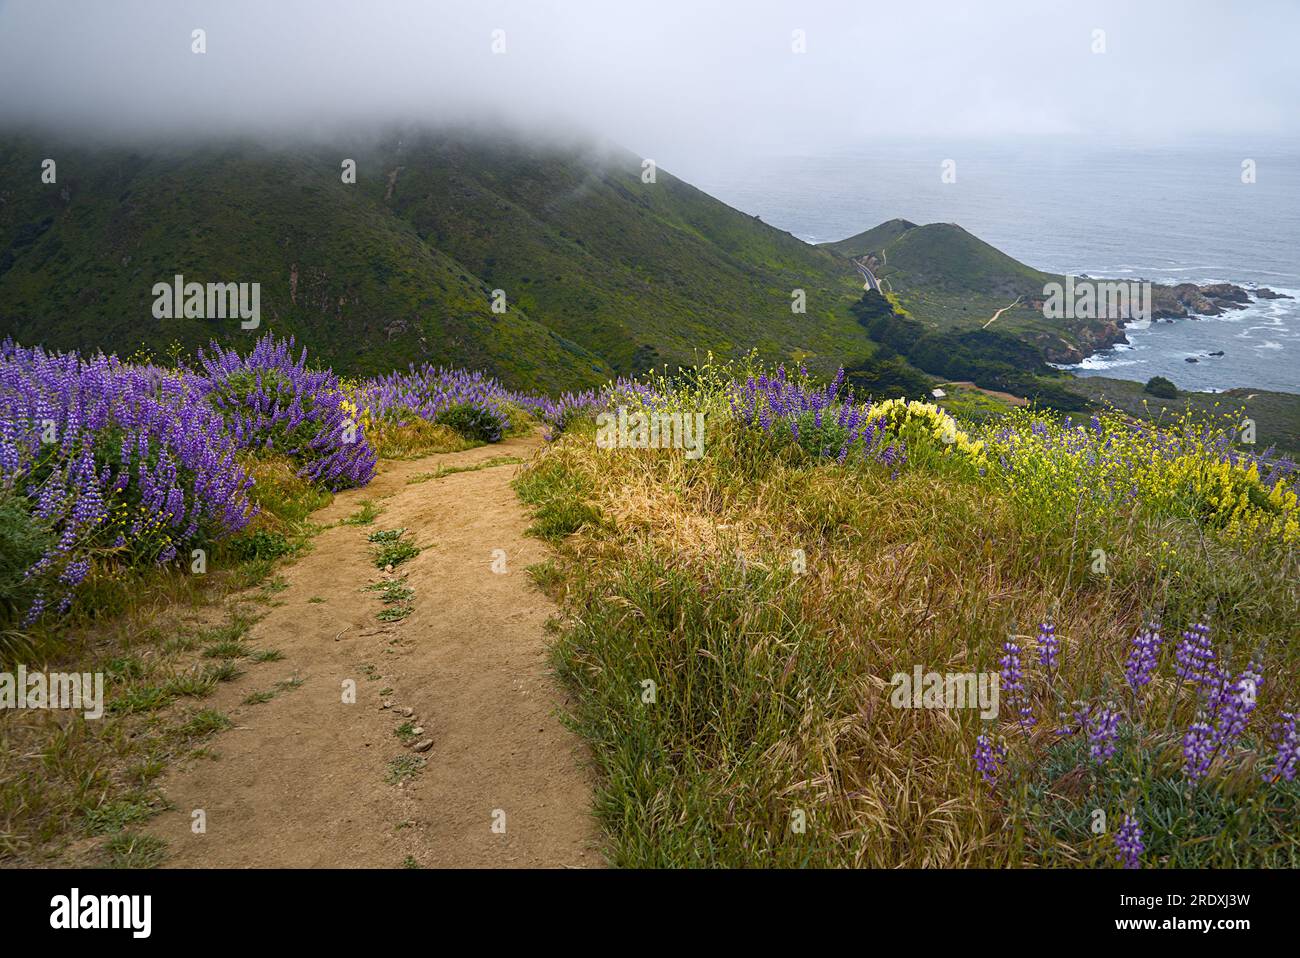 Curved hiking trail with wildflowers on both side on the coastal hill in a foggy day. Stock Photo